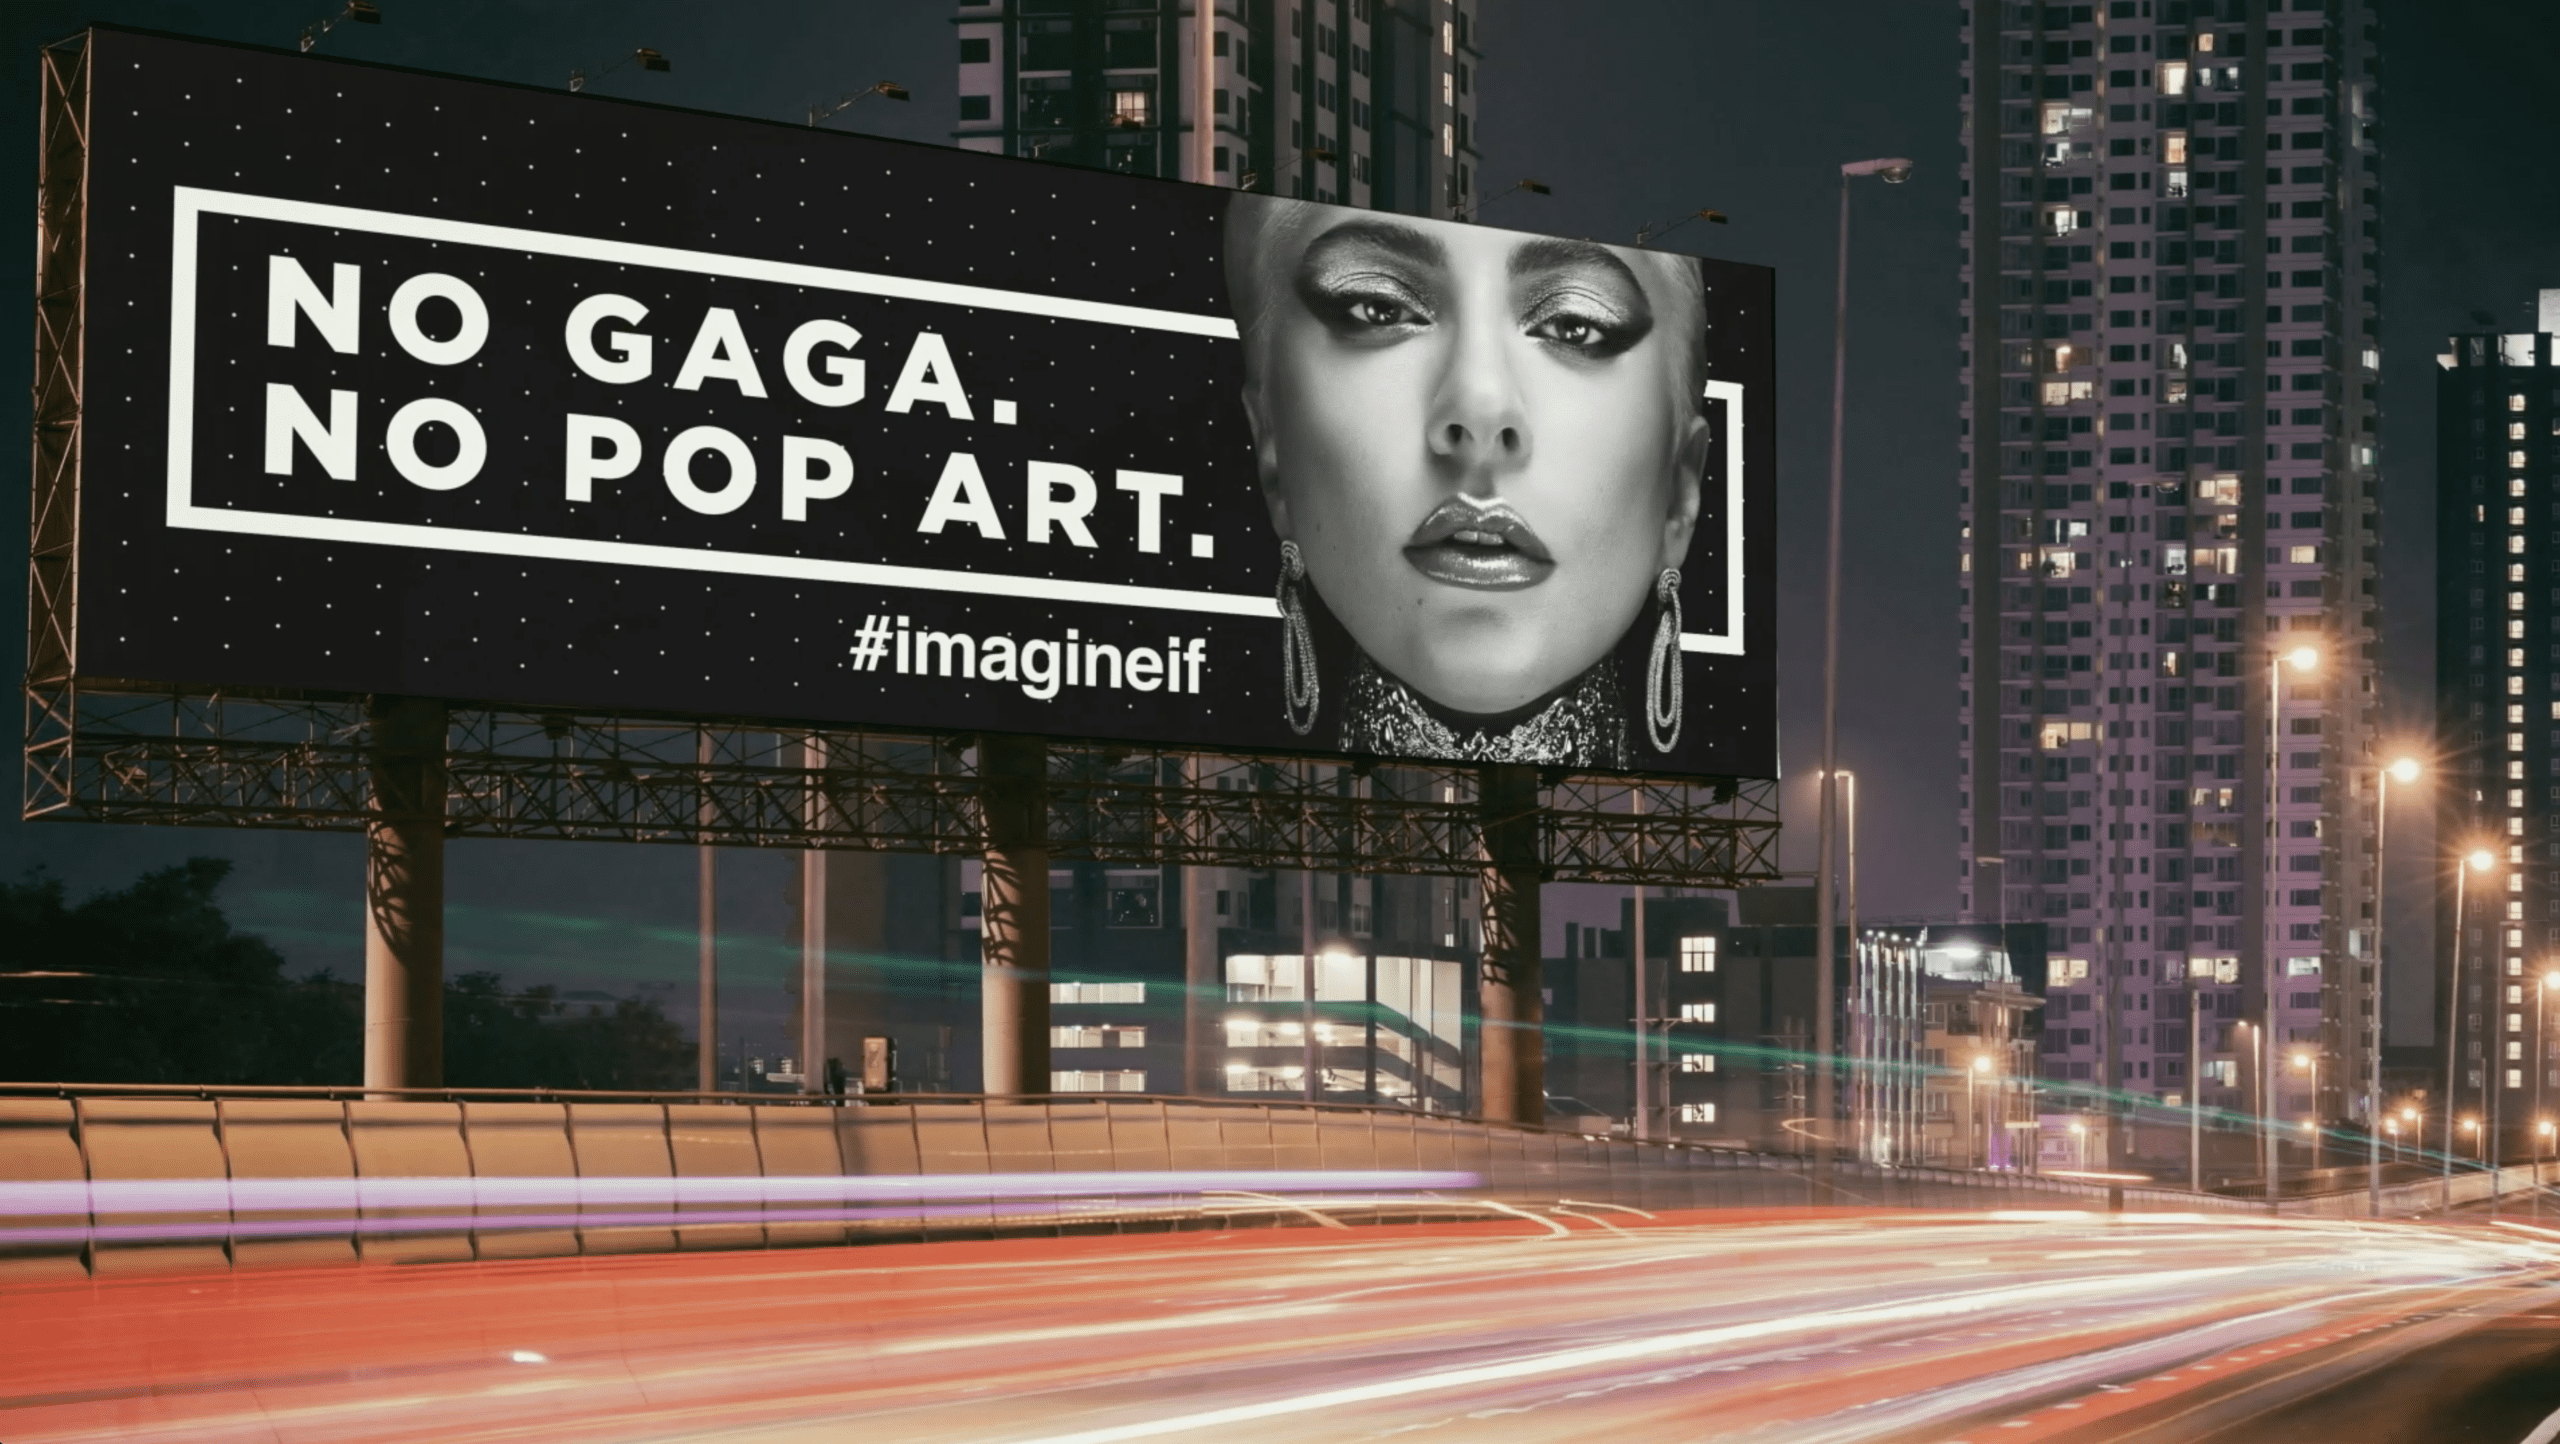 Image of a billboard on the side of a city highway at night. The billboard has a black and white image of Lady Gaga against a black background. To her right are the words "No Gaga. No Pop Art. #Imagine If" in bold white text.